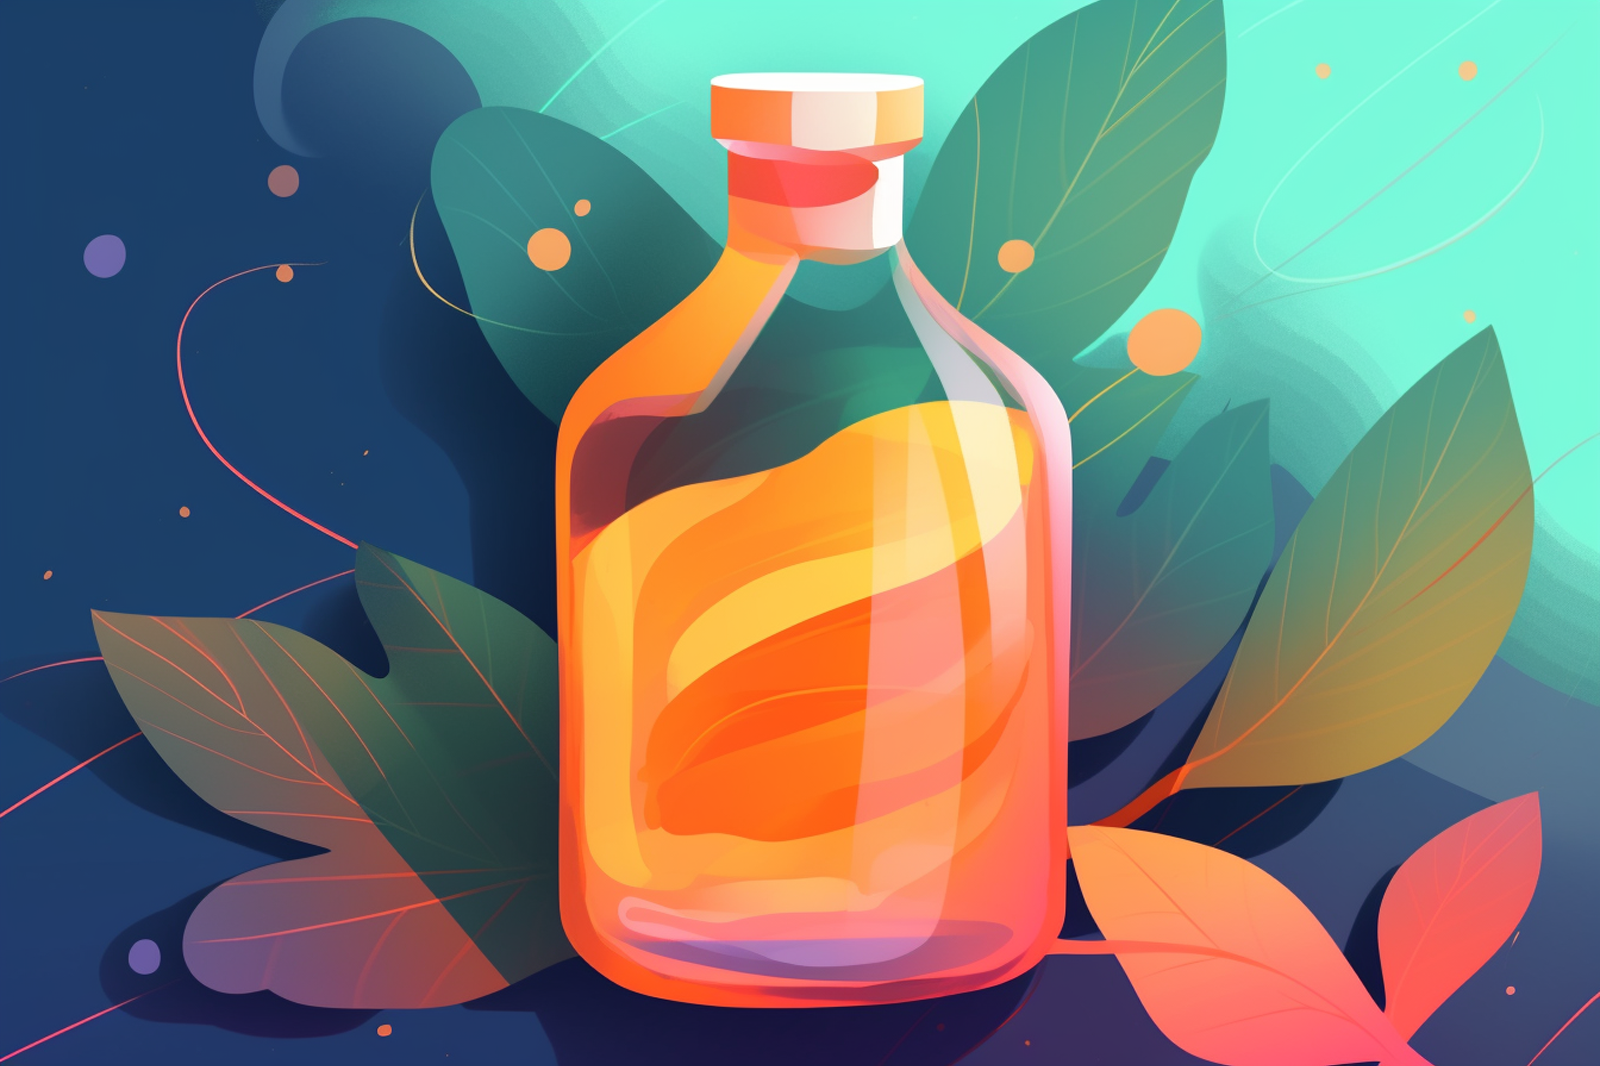 Bottle of full MCT Oil against blue background with painted leaves